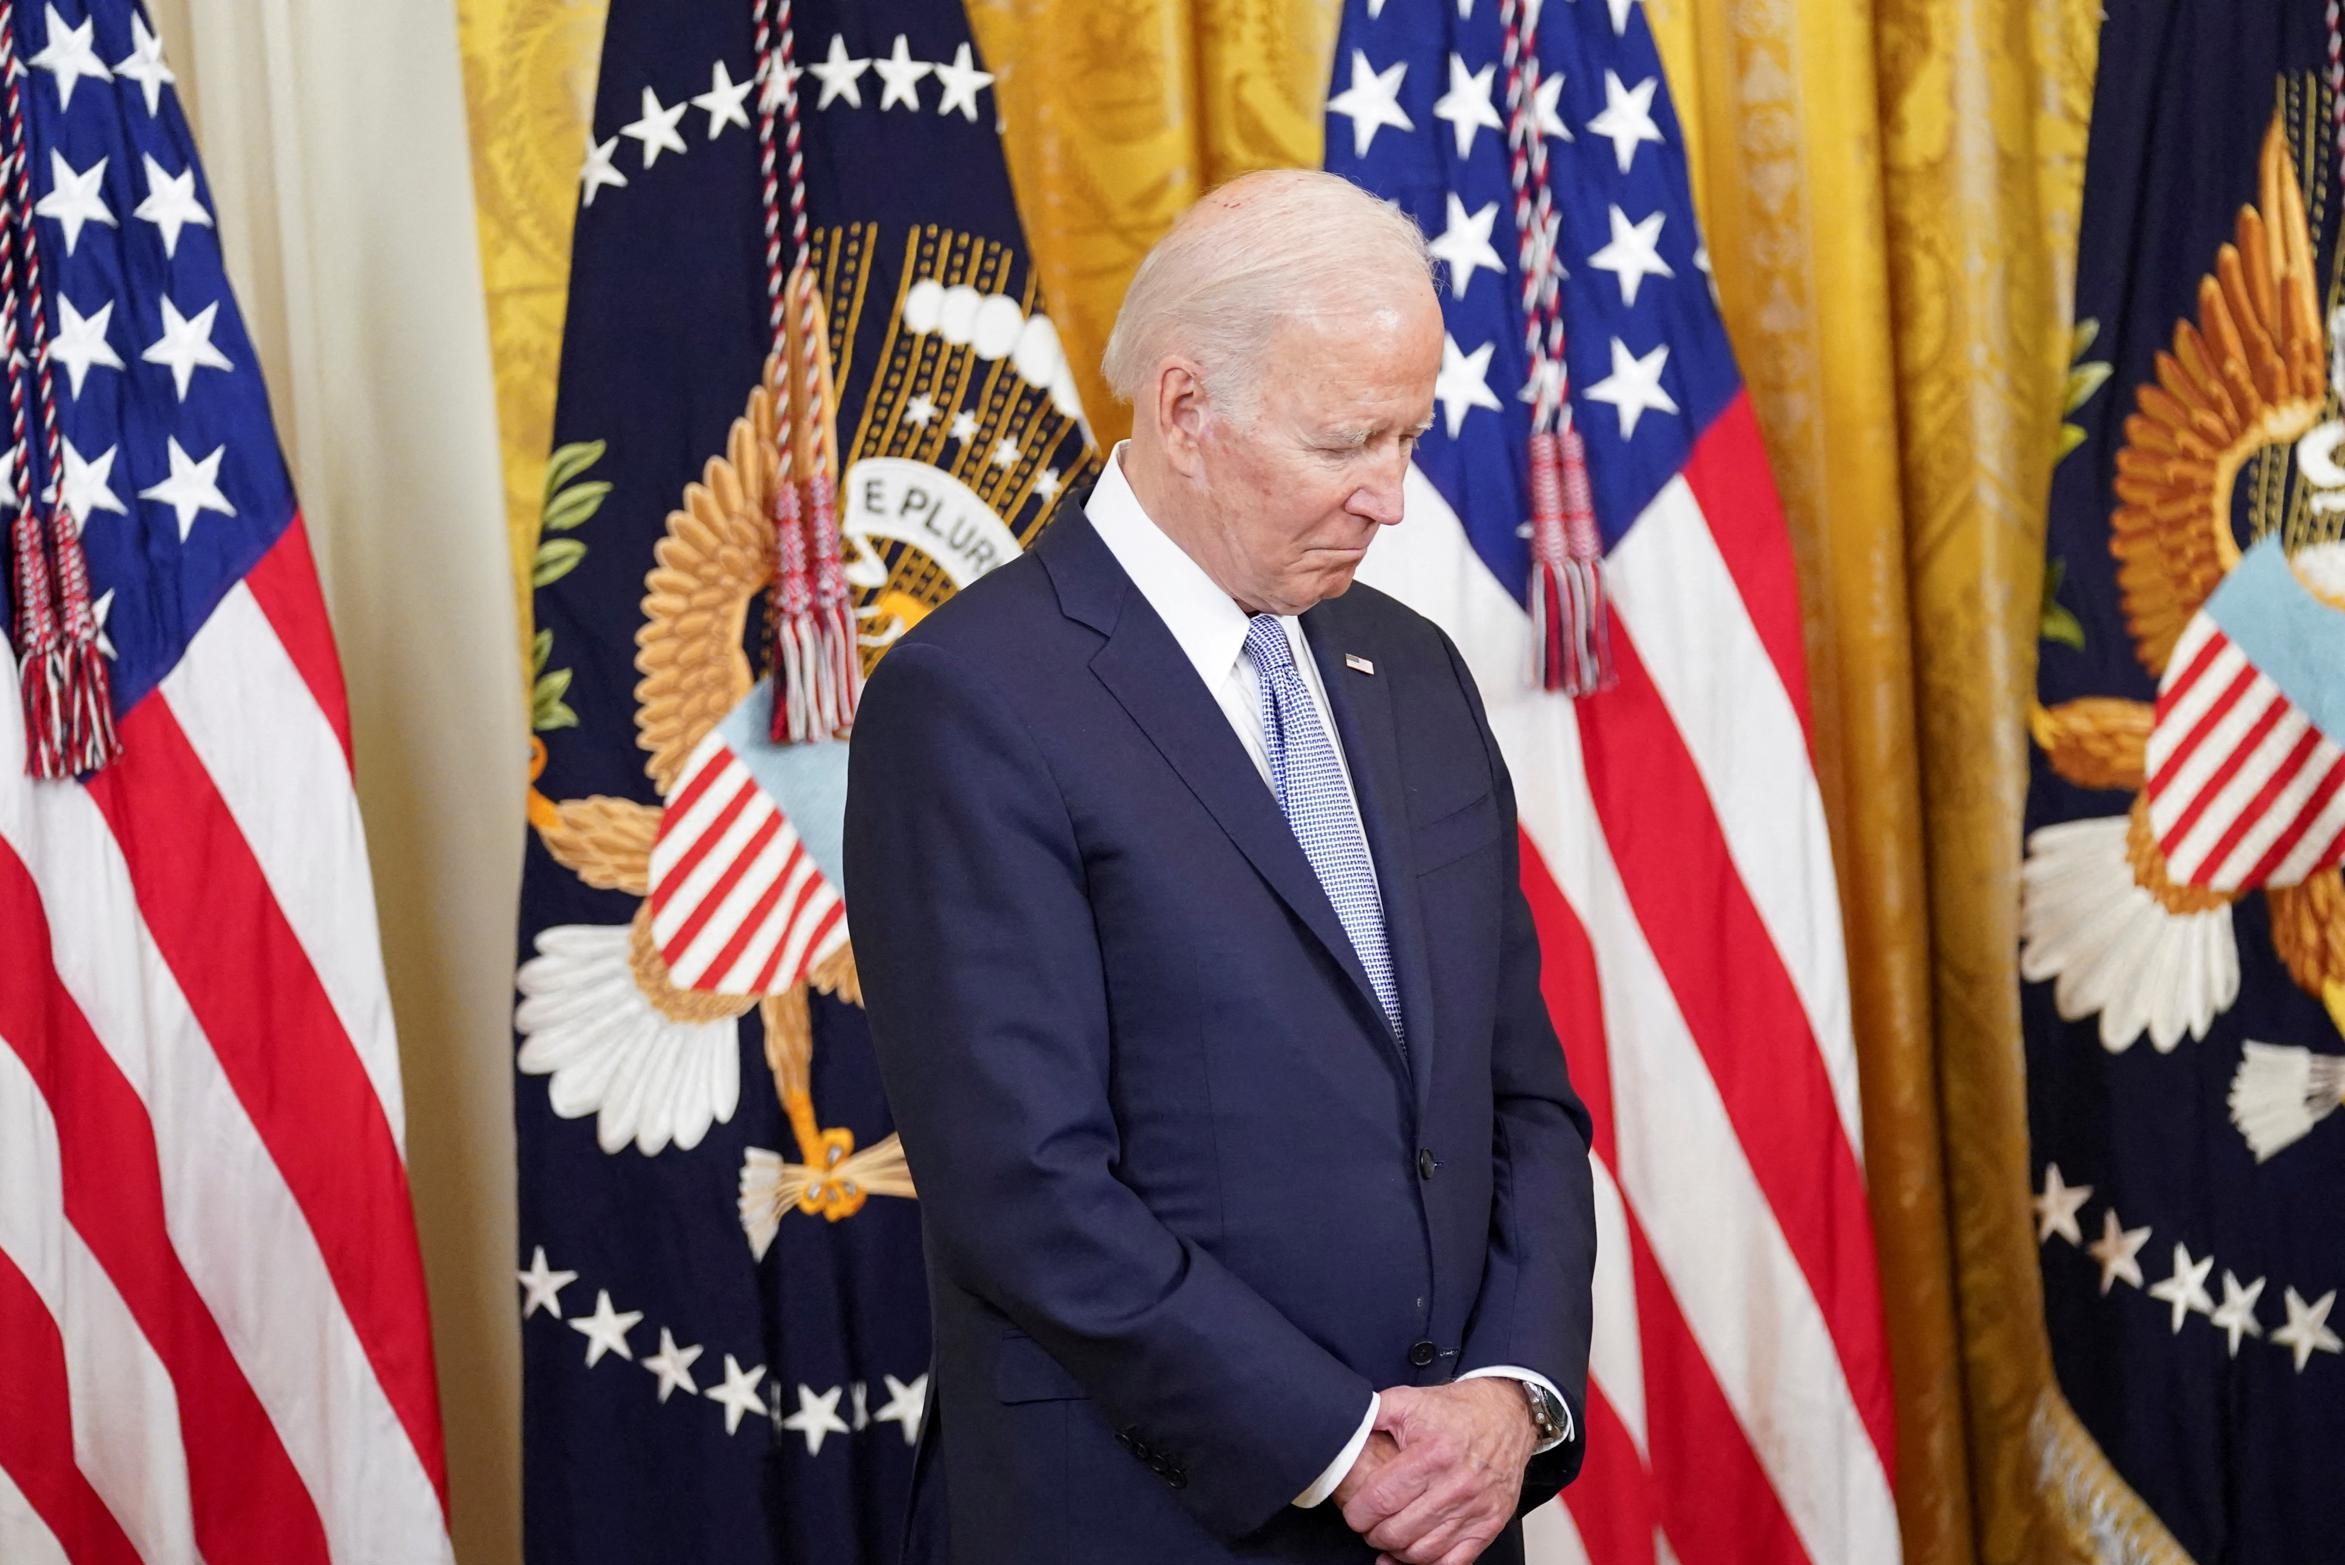 US President Joe Biden defends ‘fundamental’ right to abortion and calls for federal law